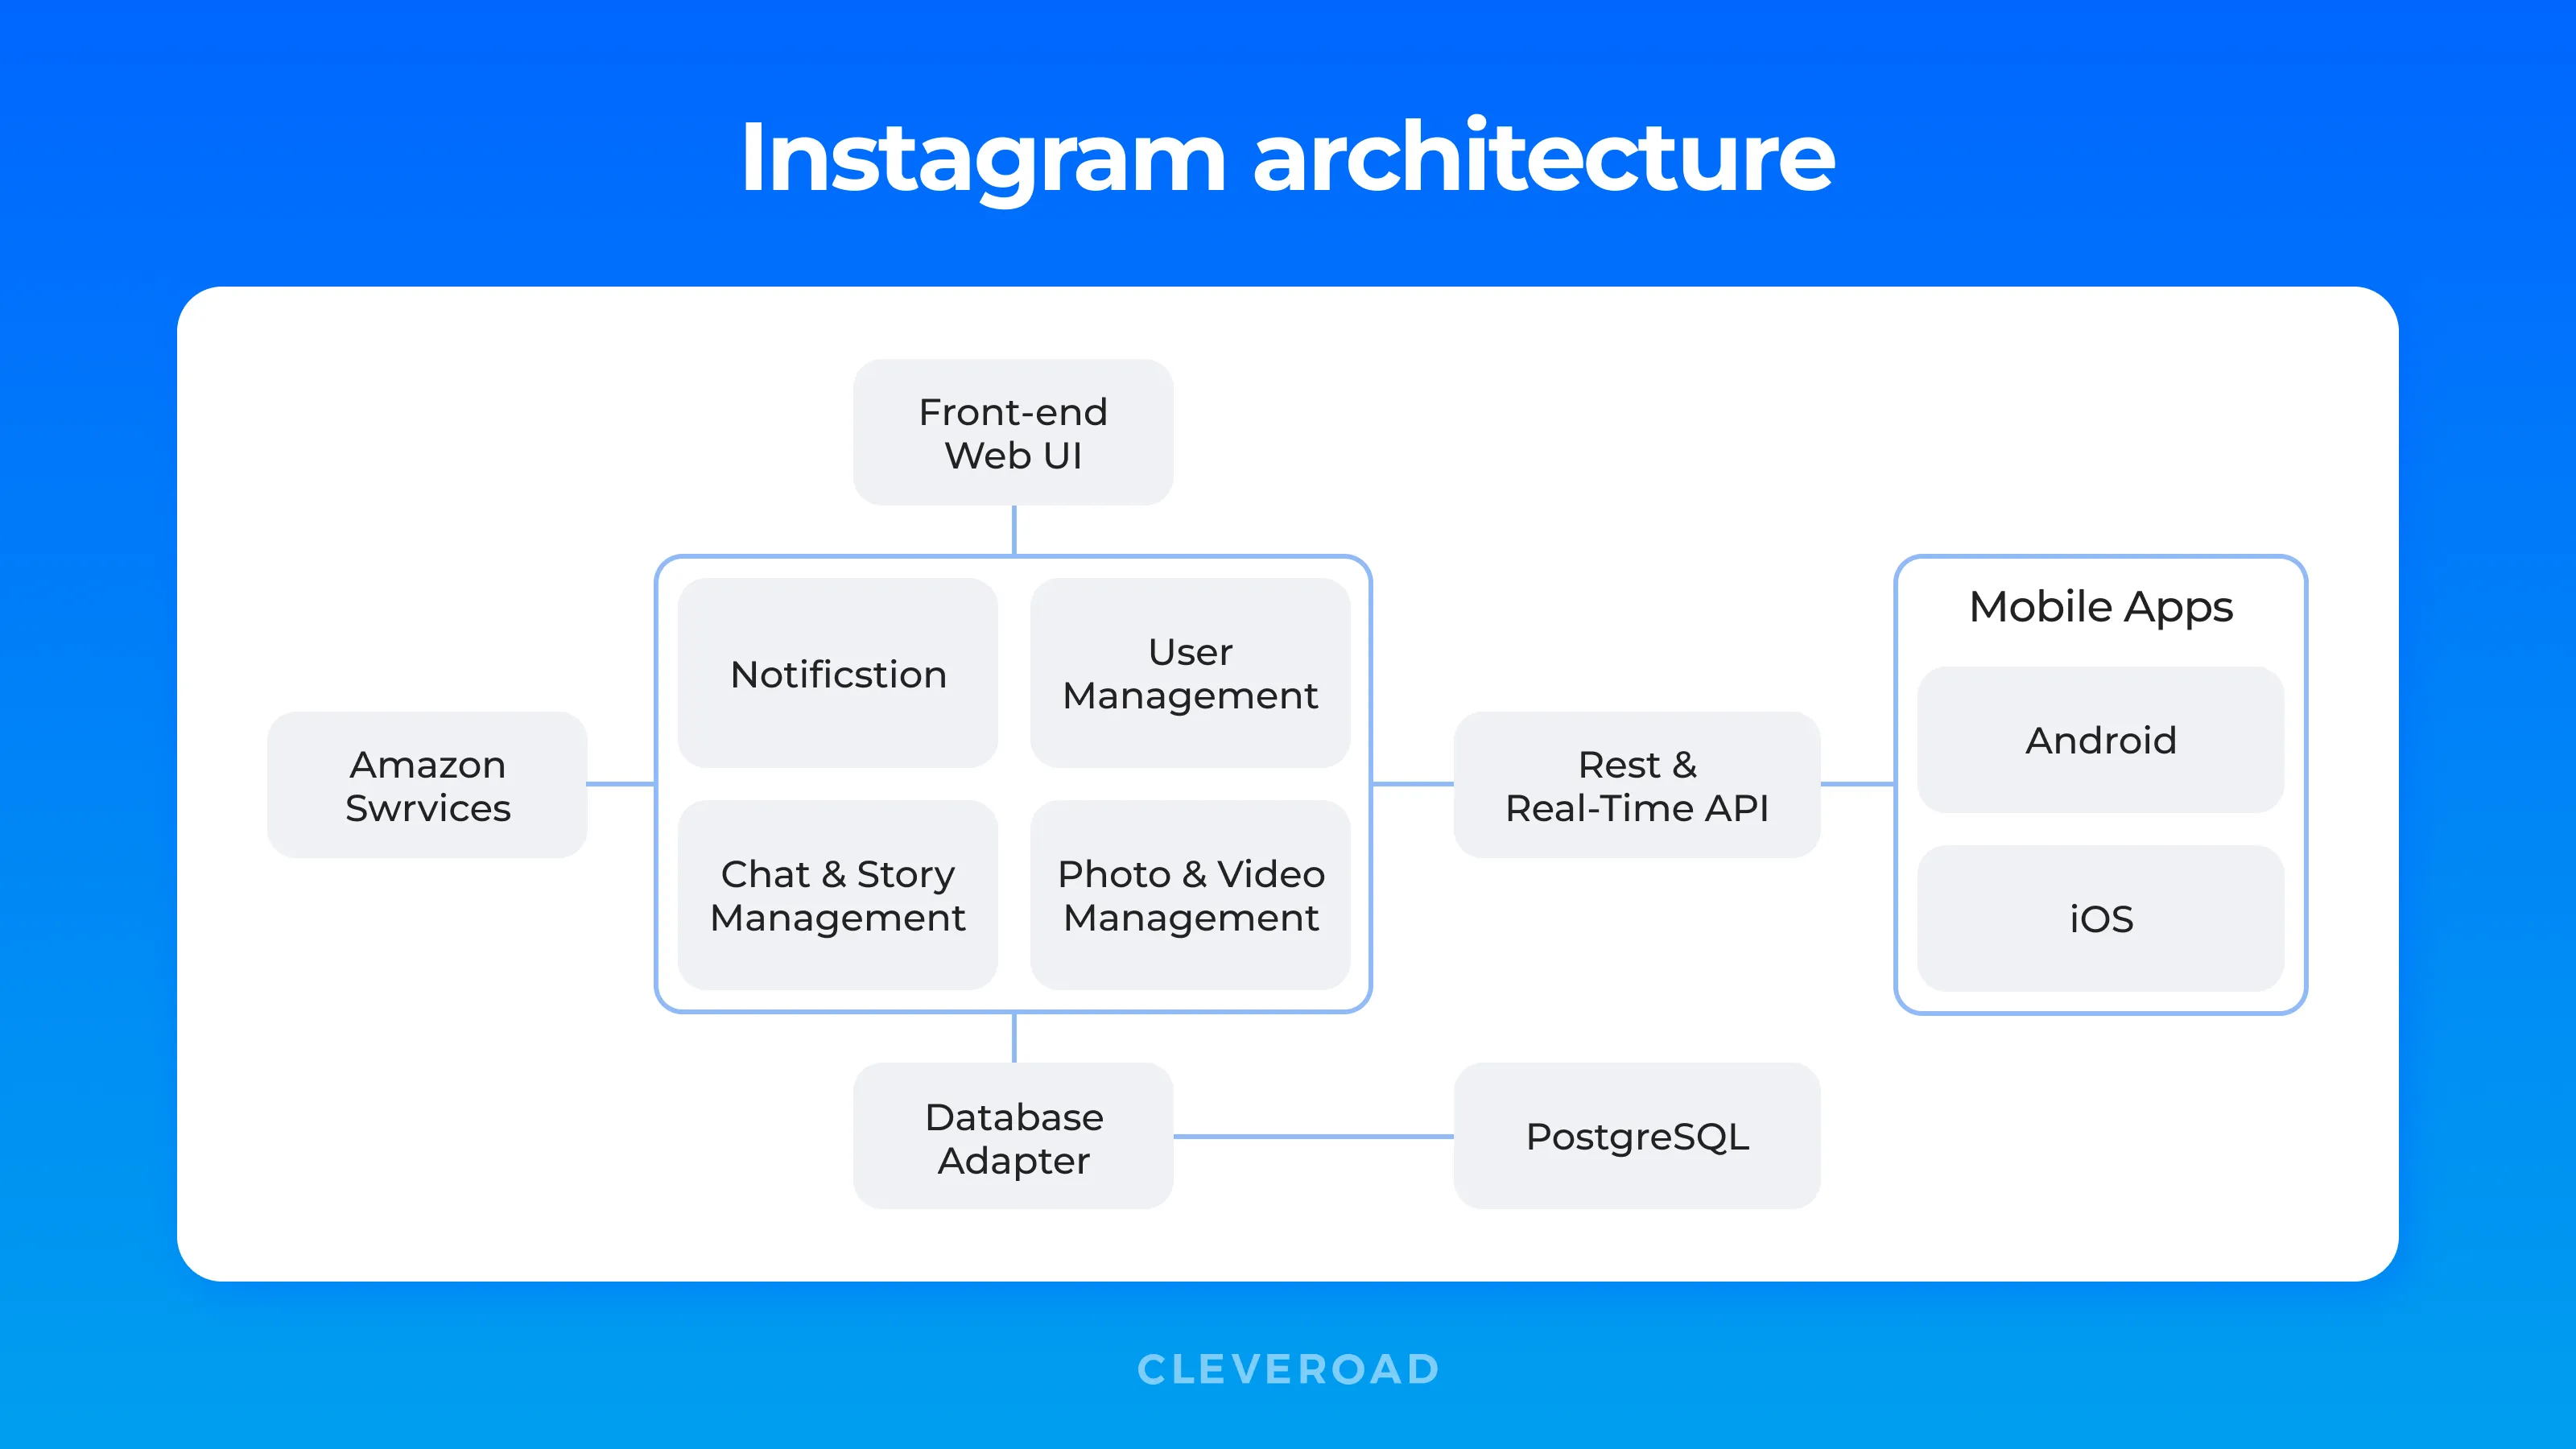 The architecture of an app like Instagram